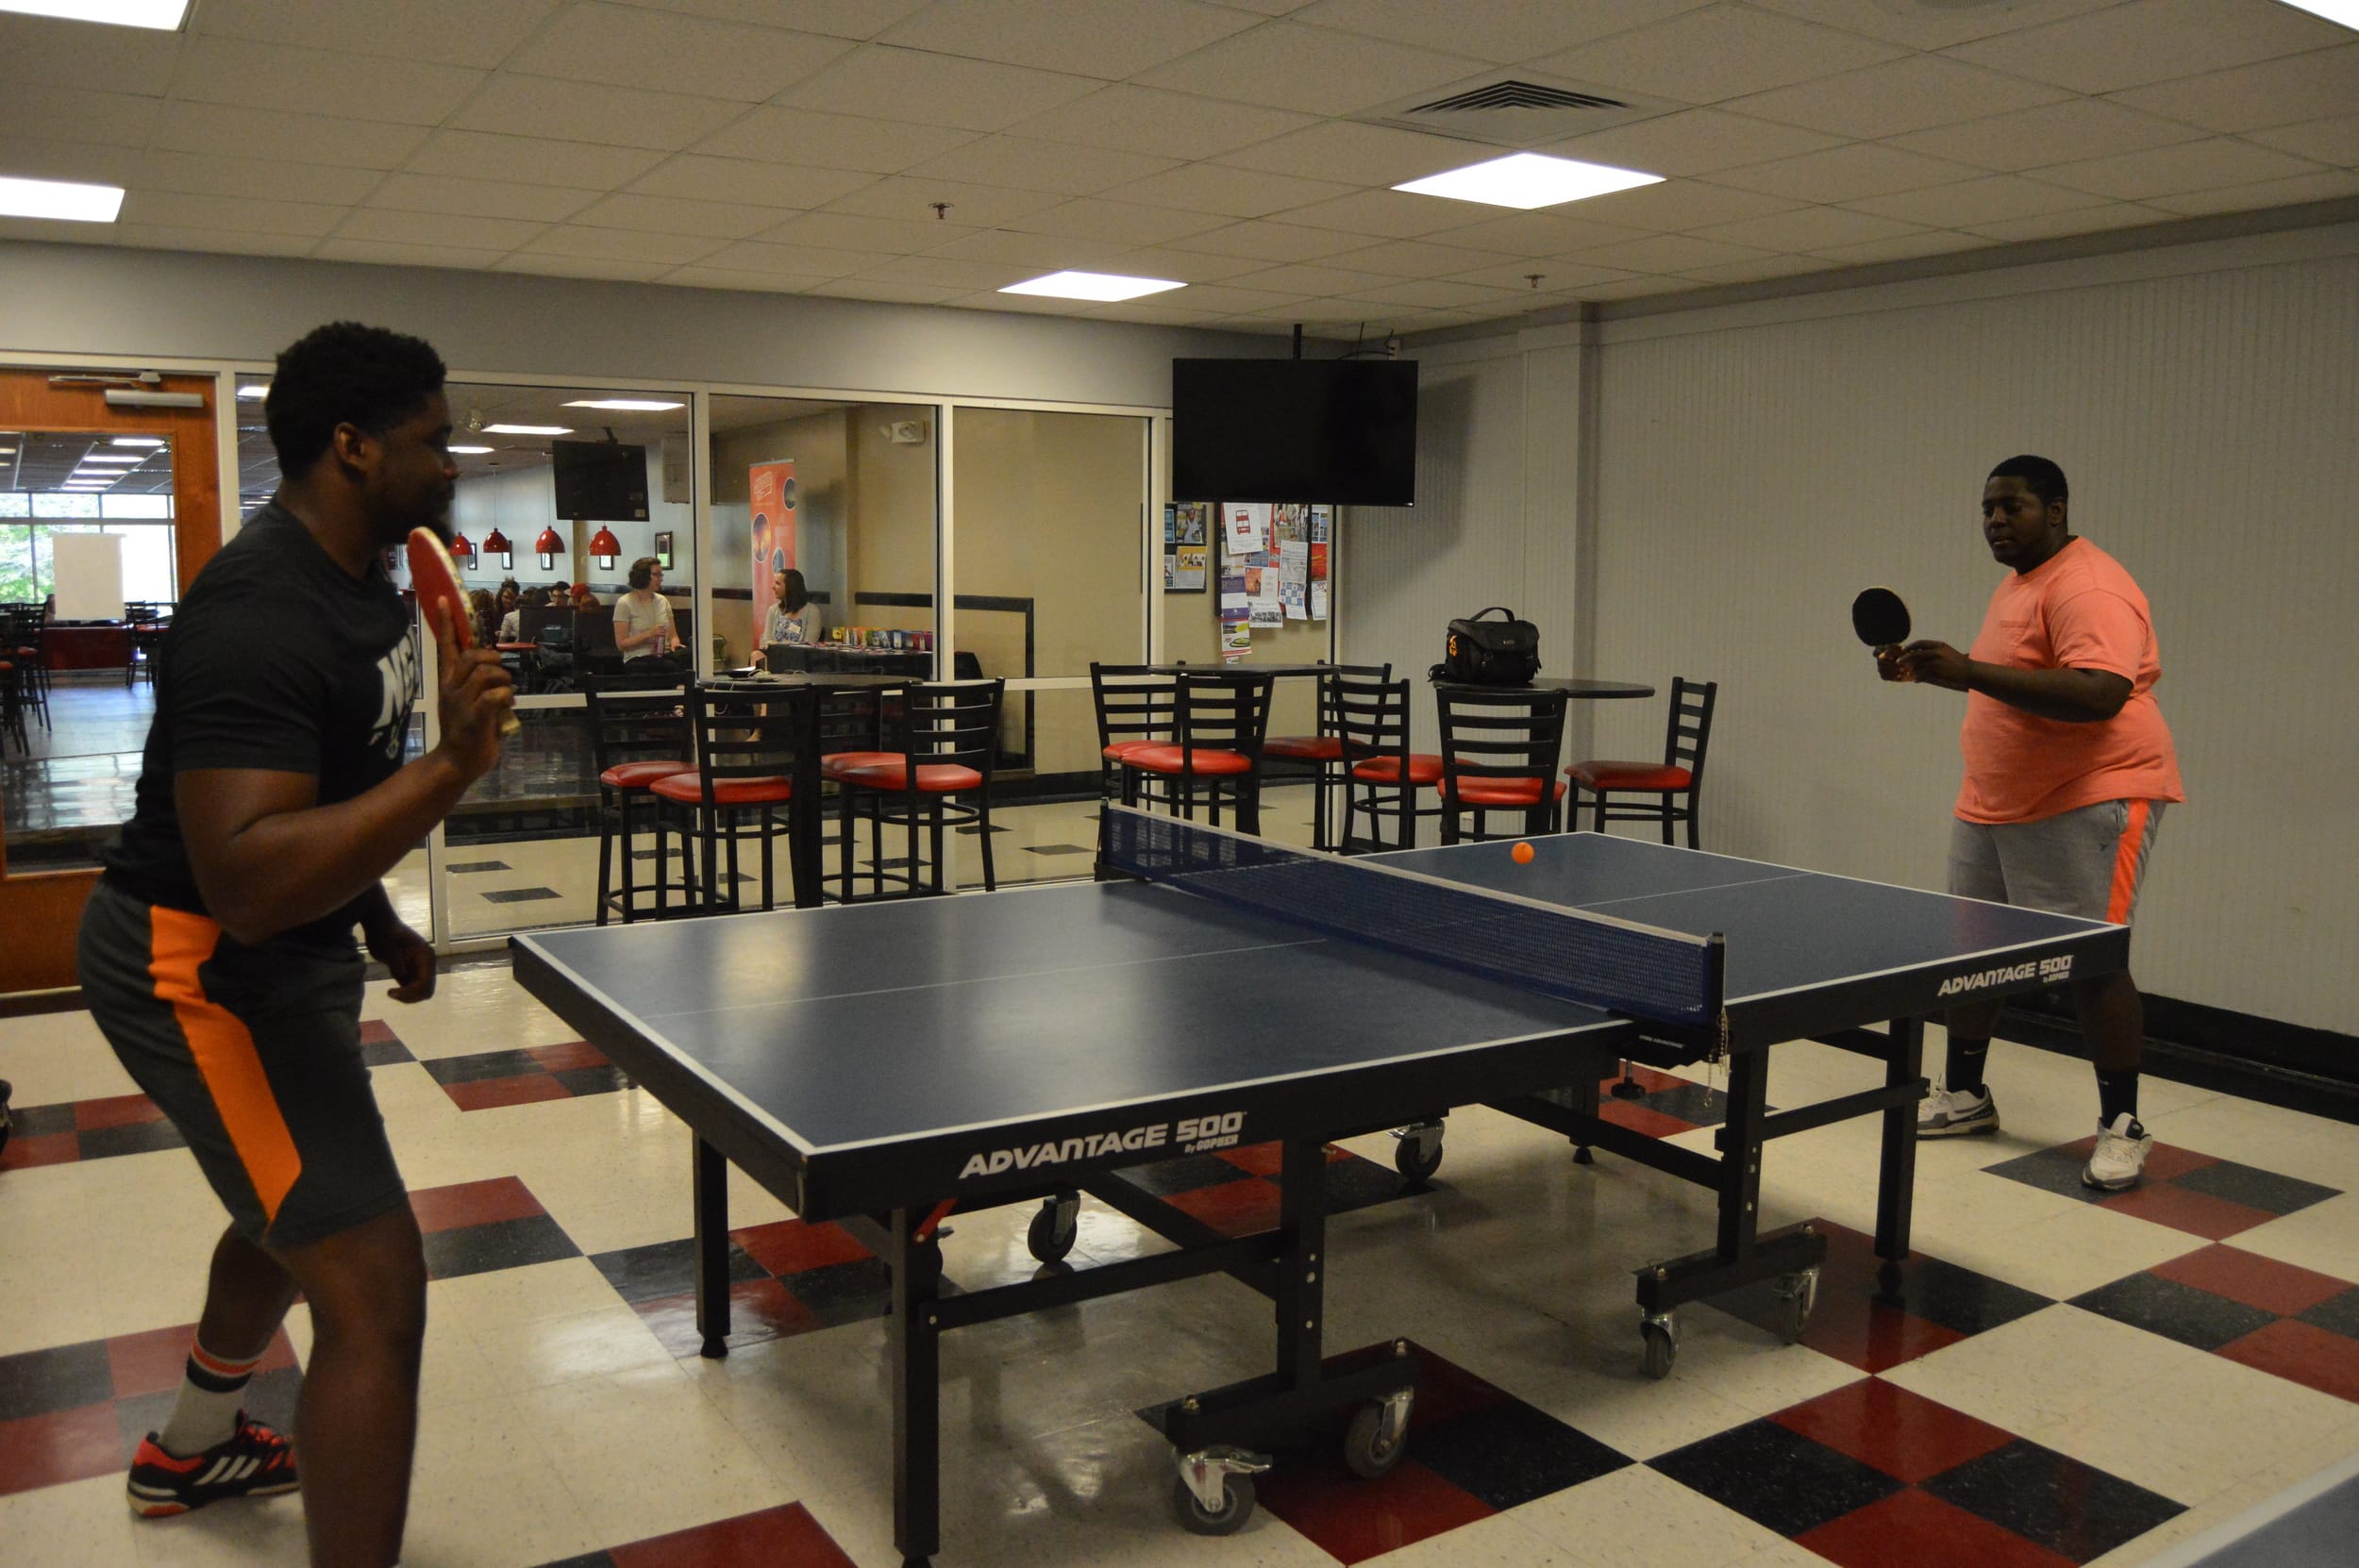 Dominique Richardson and Shamark Anderson face off in an intense match of ping pong.